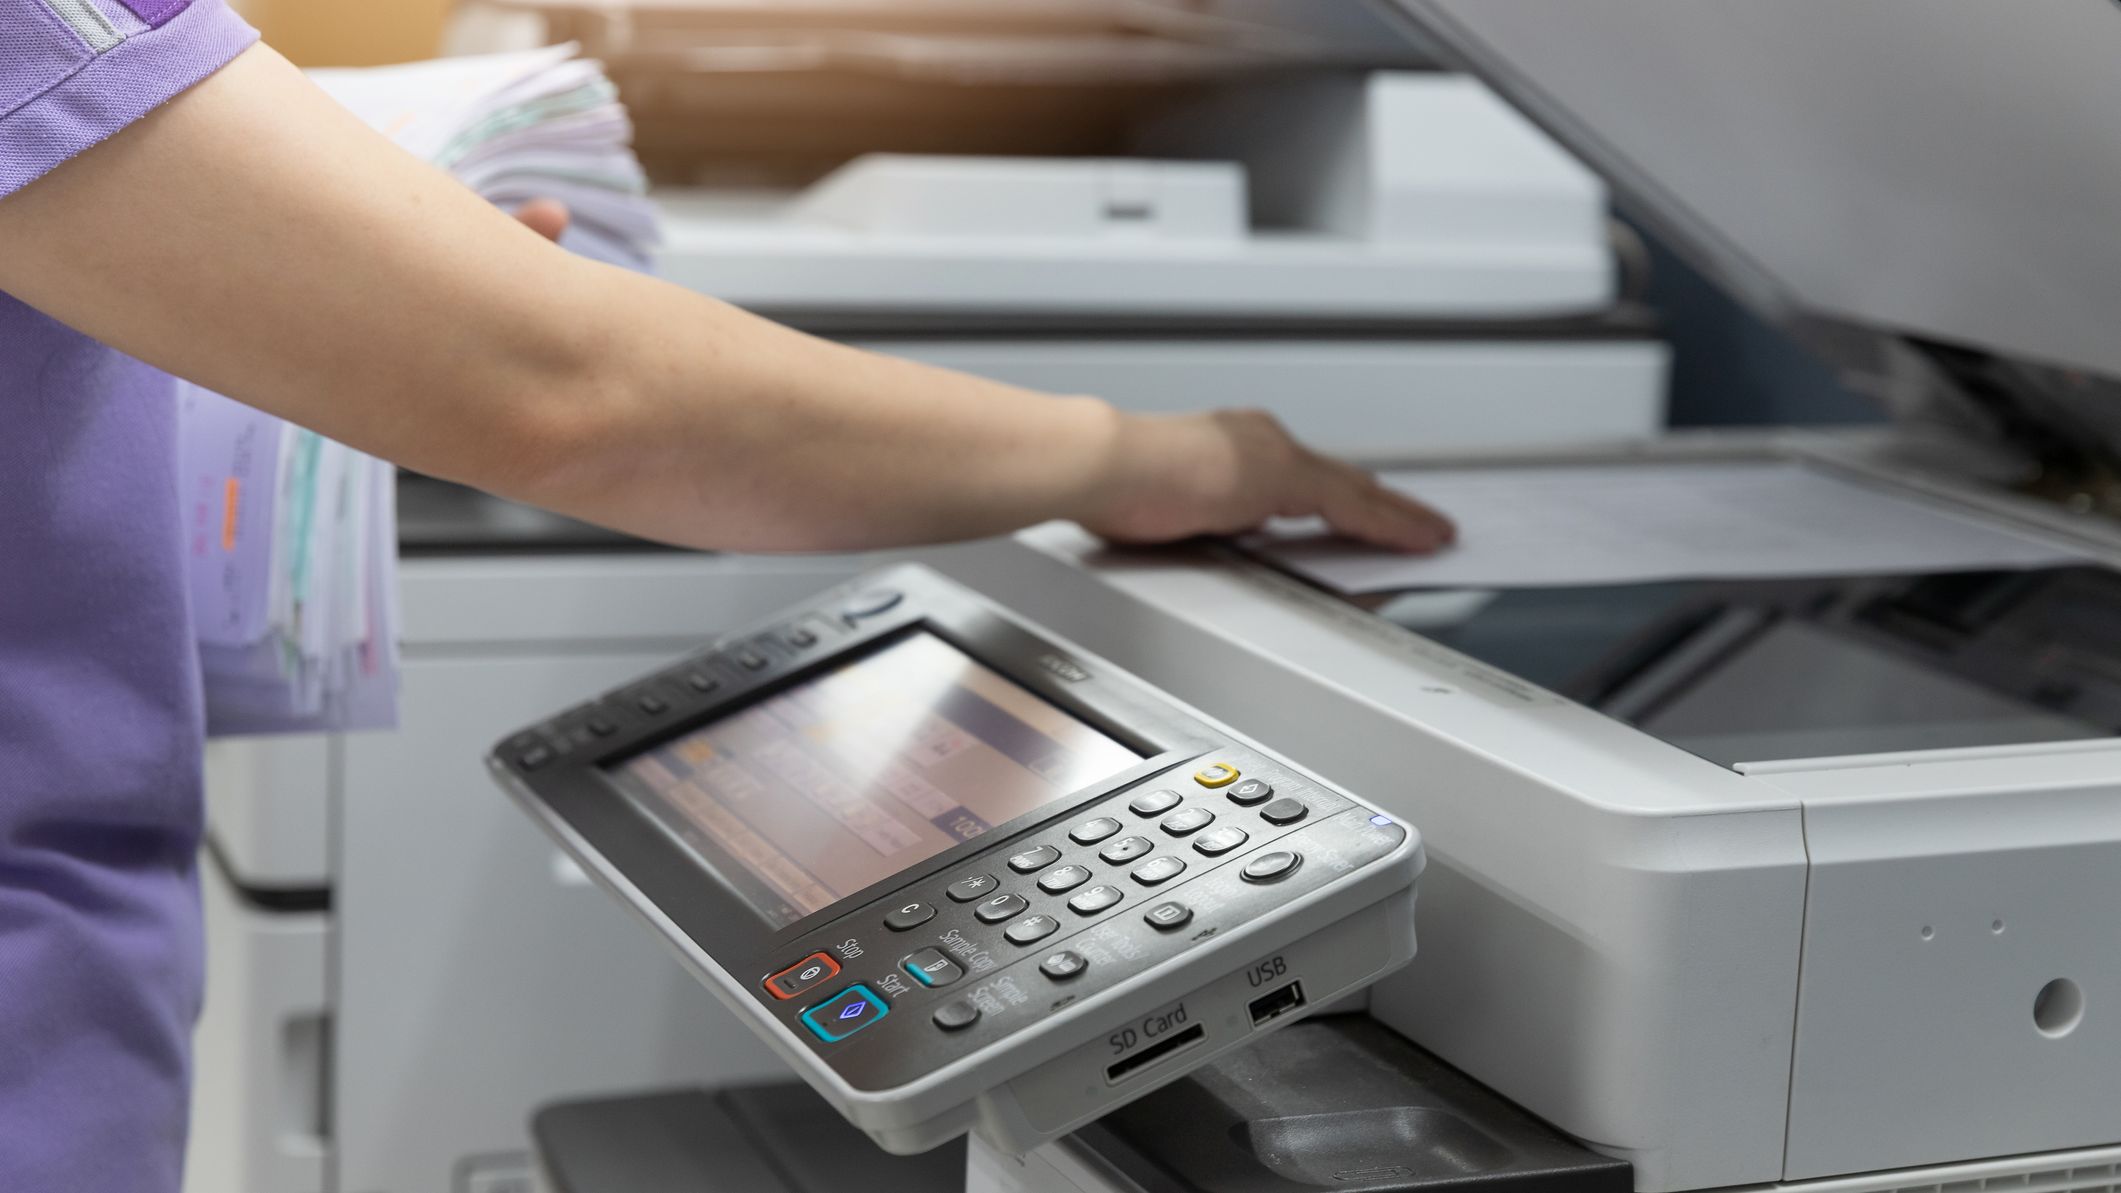 LED vs laser printers: Which is better for business?